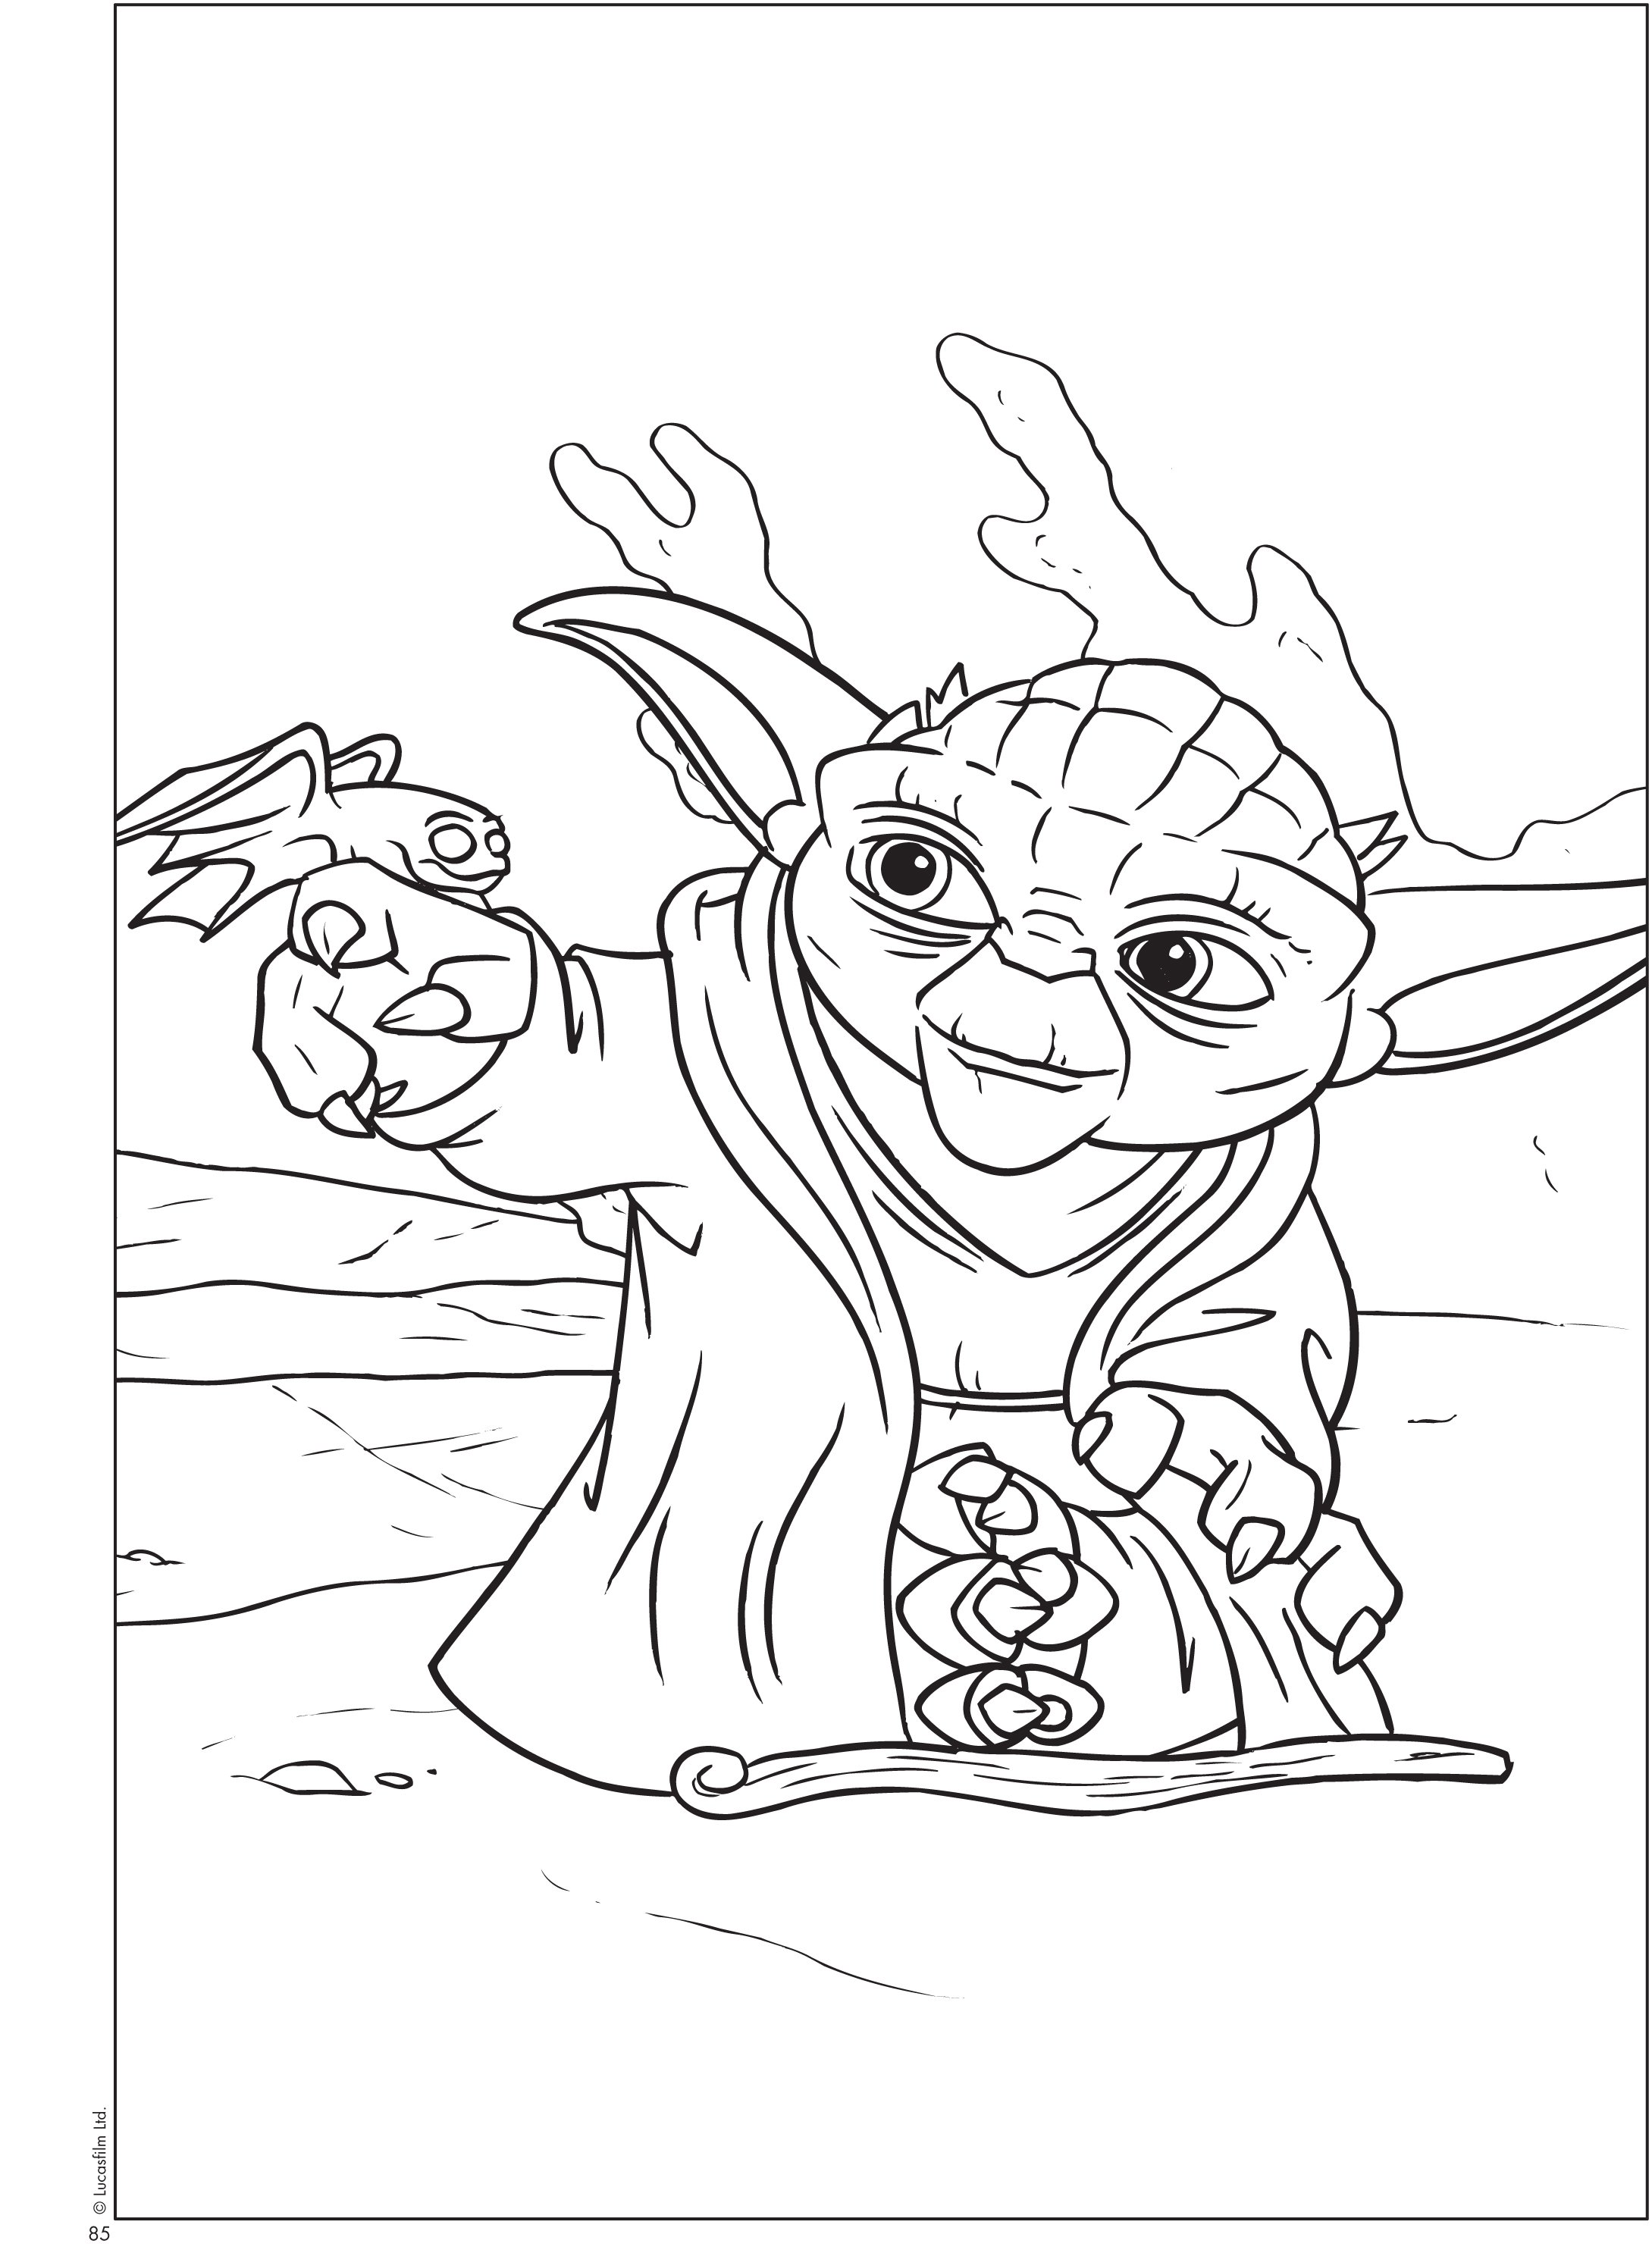 140+ Star Wars Coloring Pages Collection 134